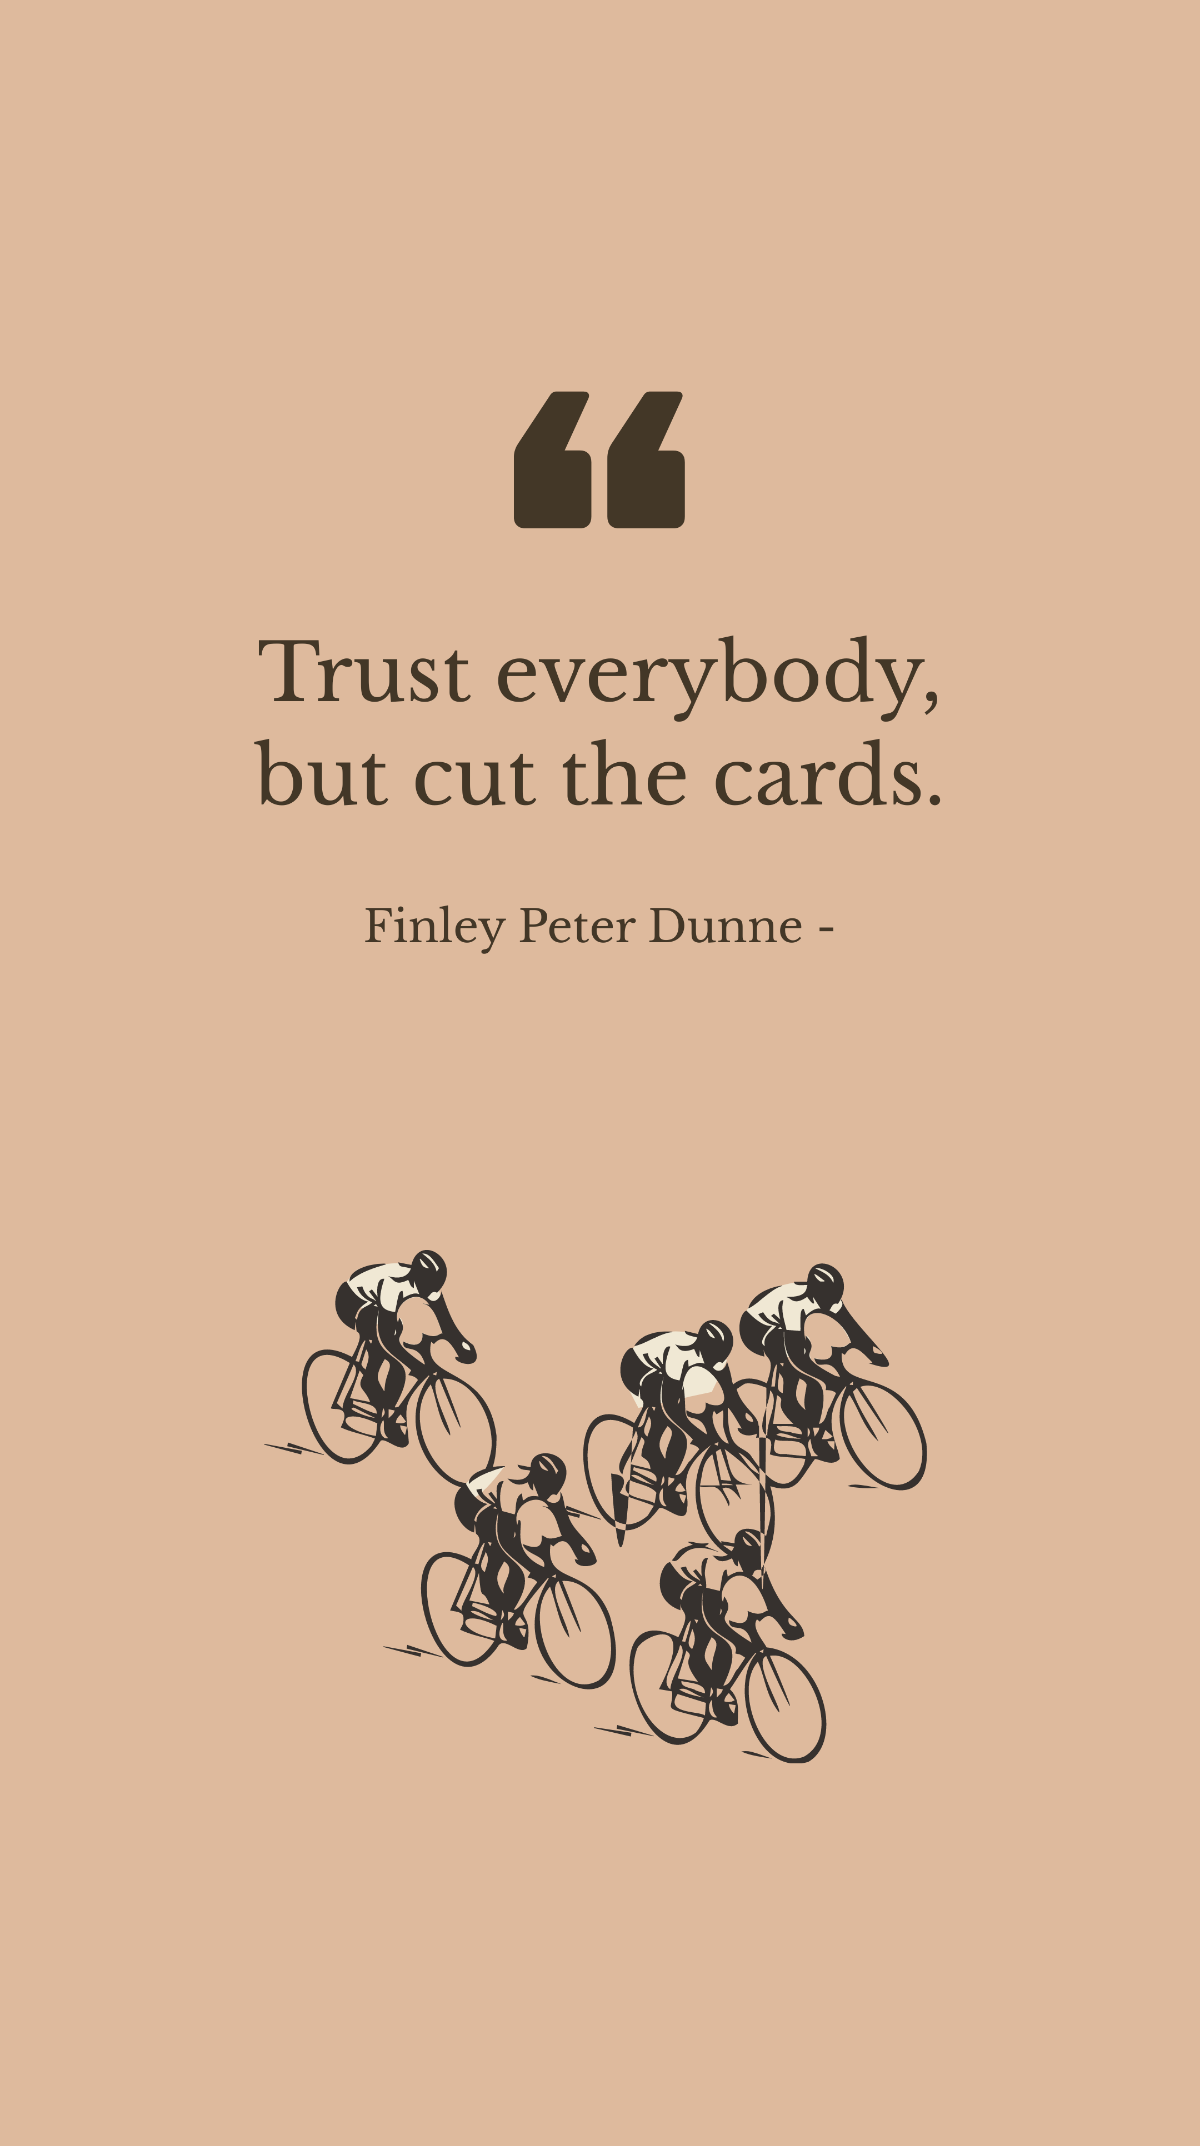 Finley Peter Dunne - Trust everybody, but cut the cards. Template